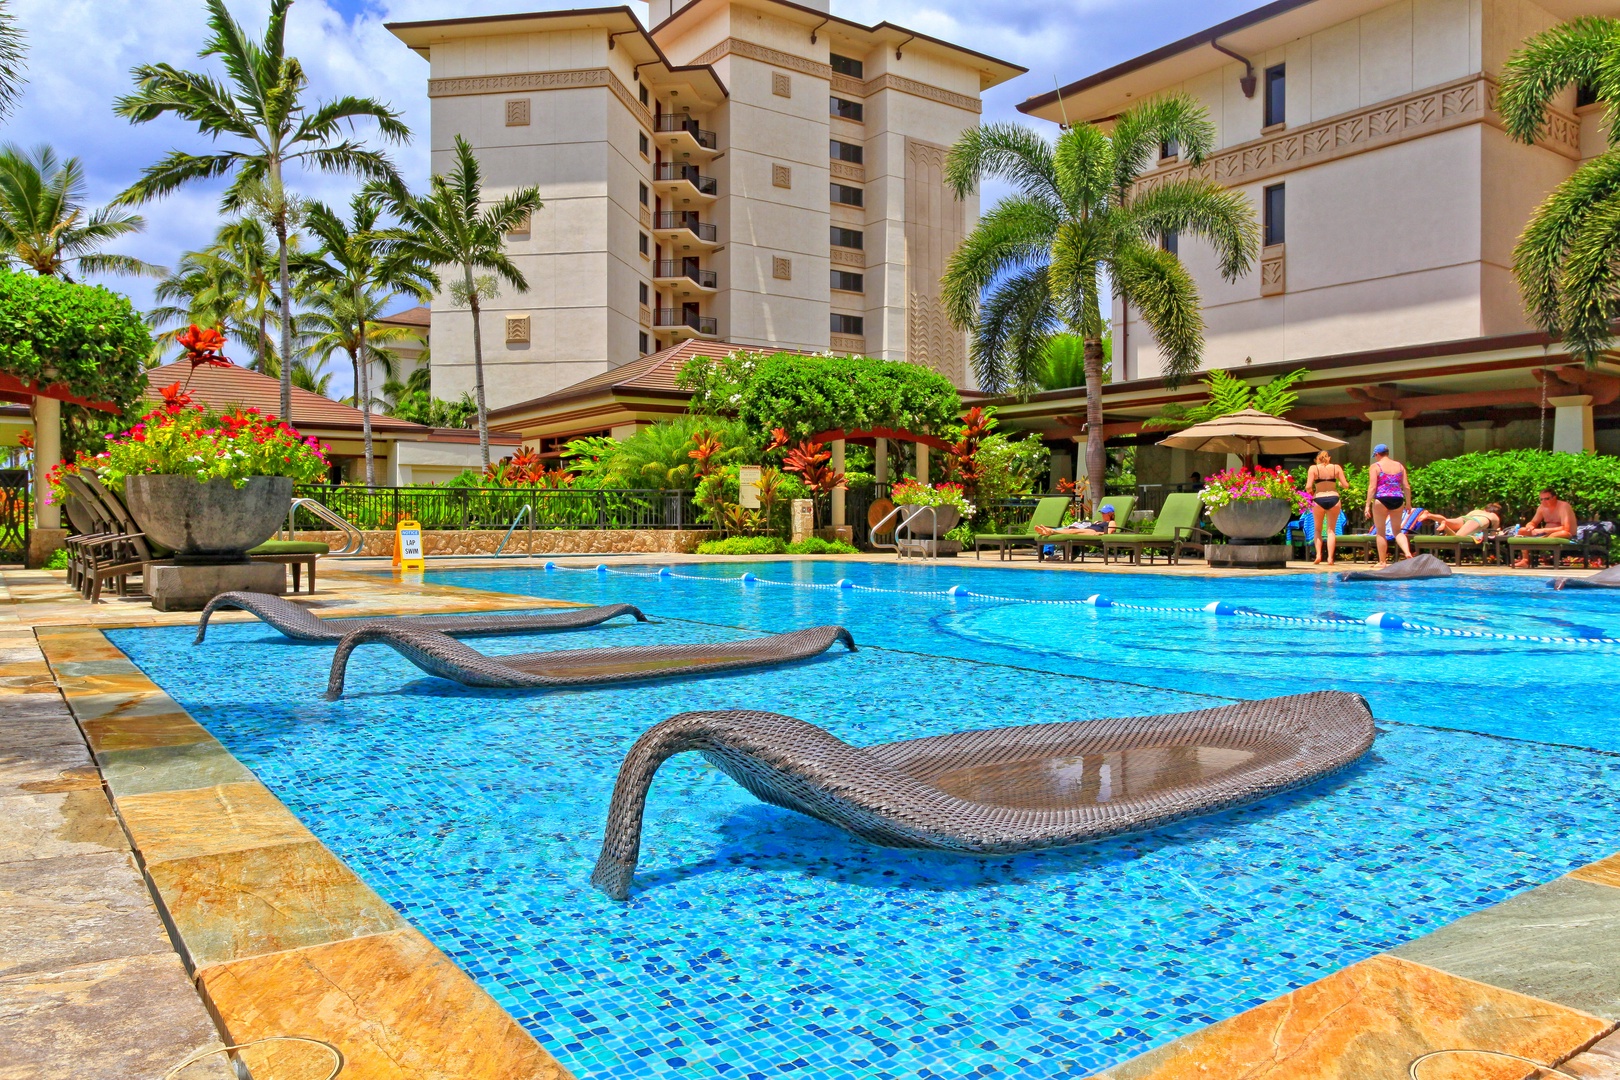 Kapolei Vacation Rentals, Ko Olina Beach Villas B706 - Water loungers in the pool for the ultimate relaxation.